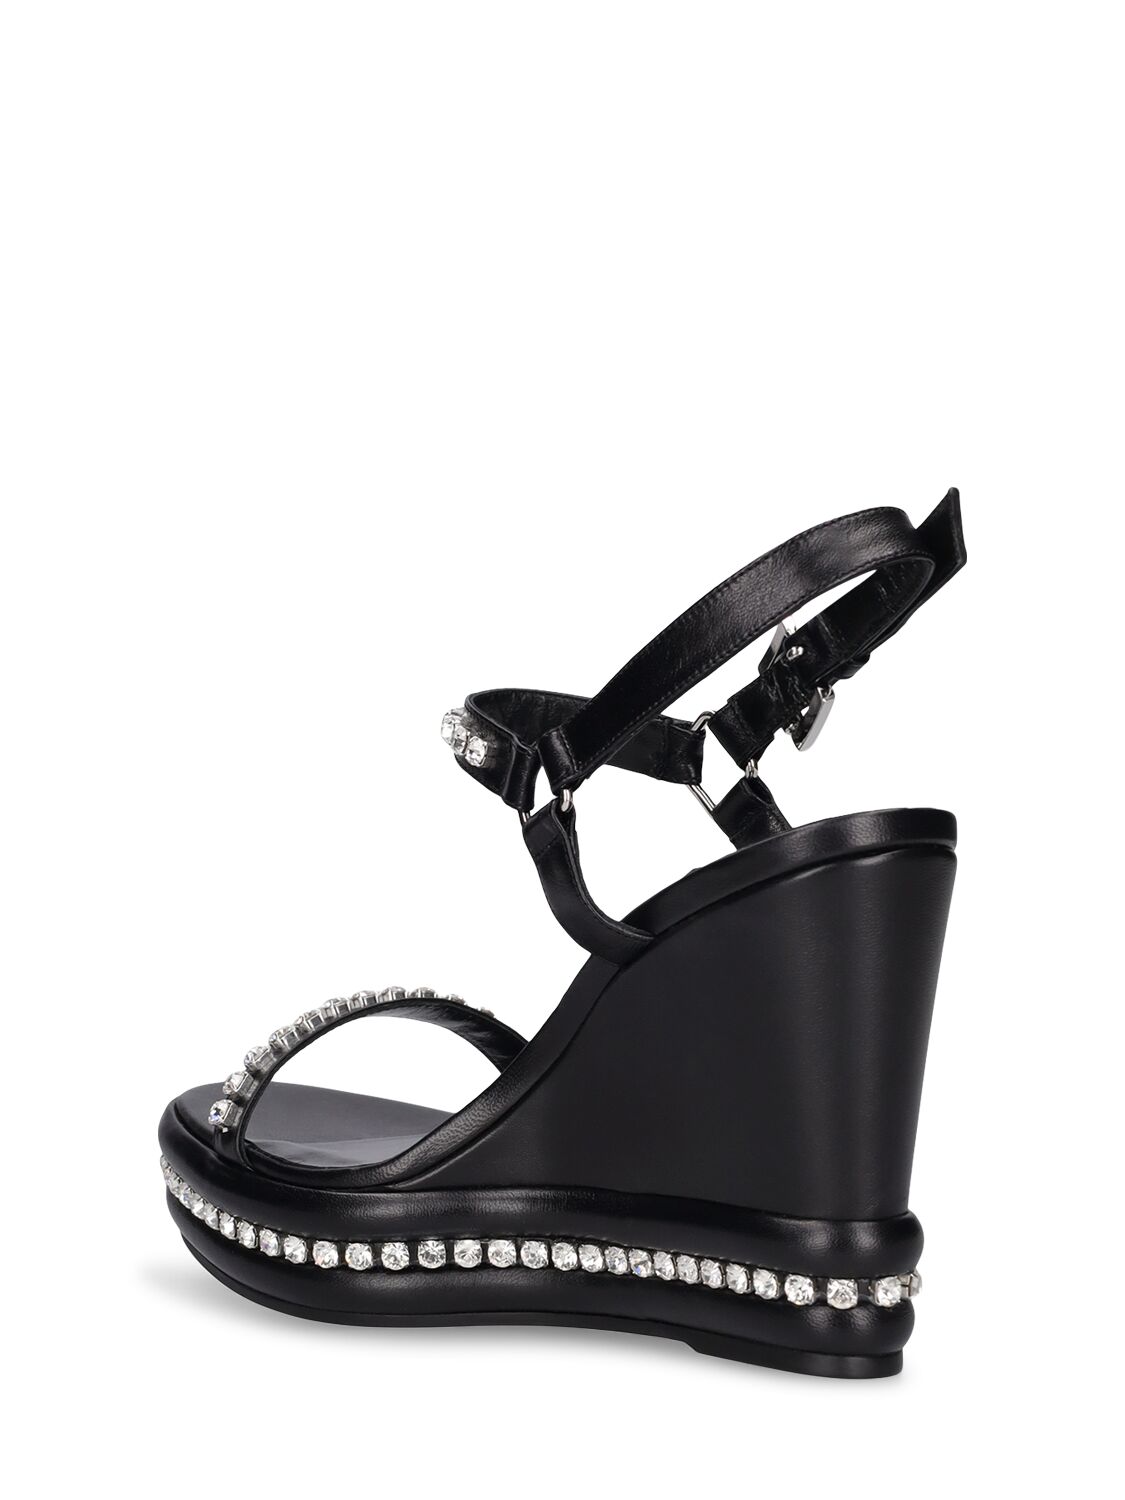 Shop Christian Louboutin 110mm Pyrastrass Leather Wedges In Black